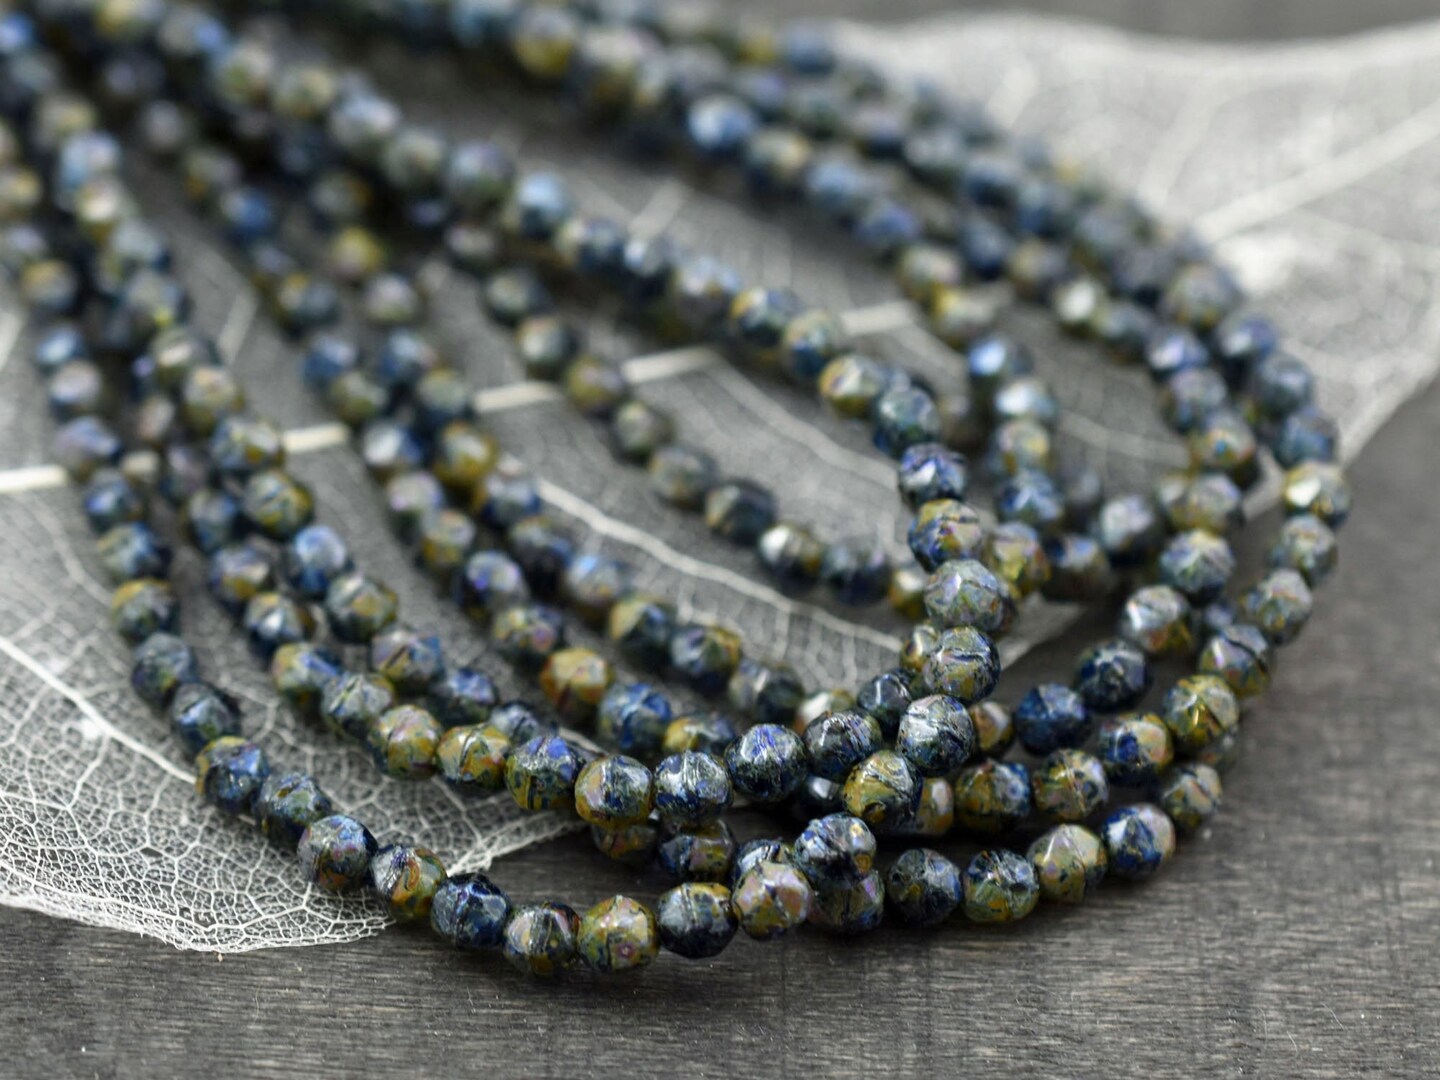 *50* 4mm Sapphire Picasso English Cut Round Beads